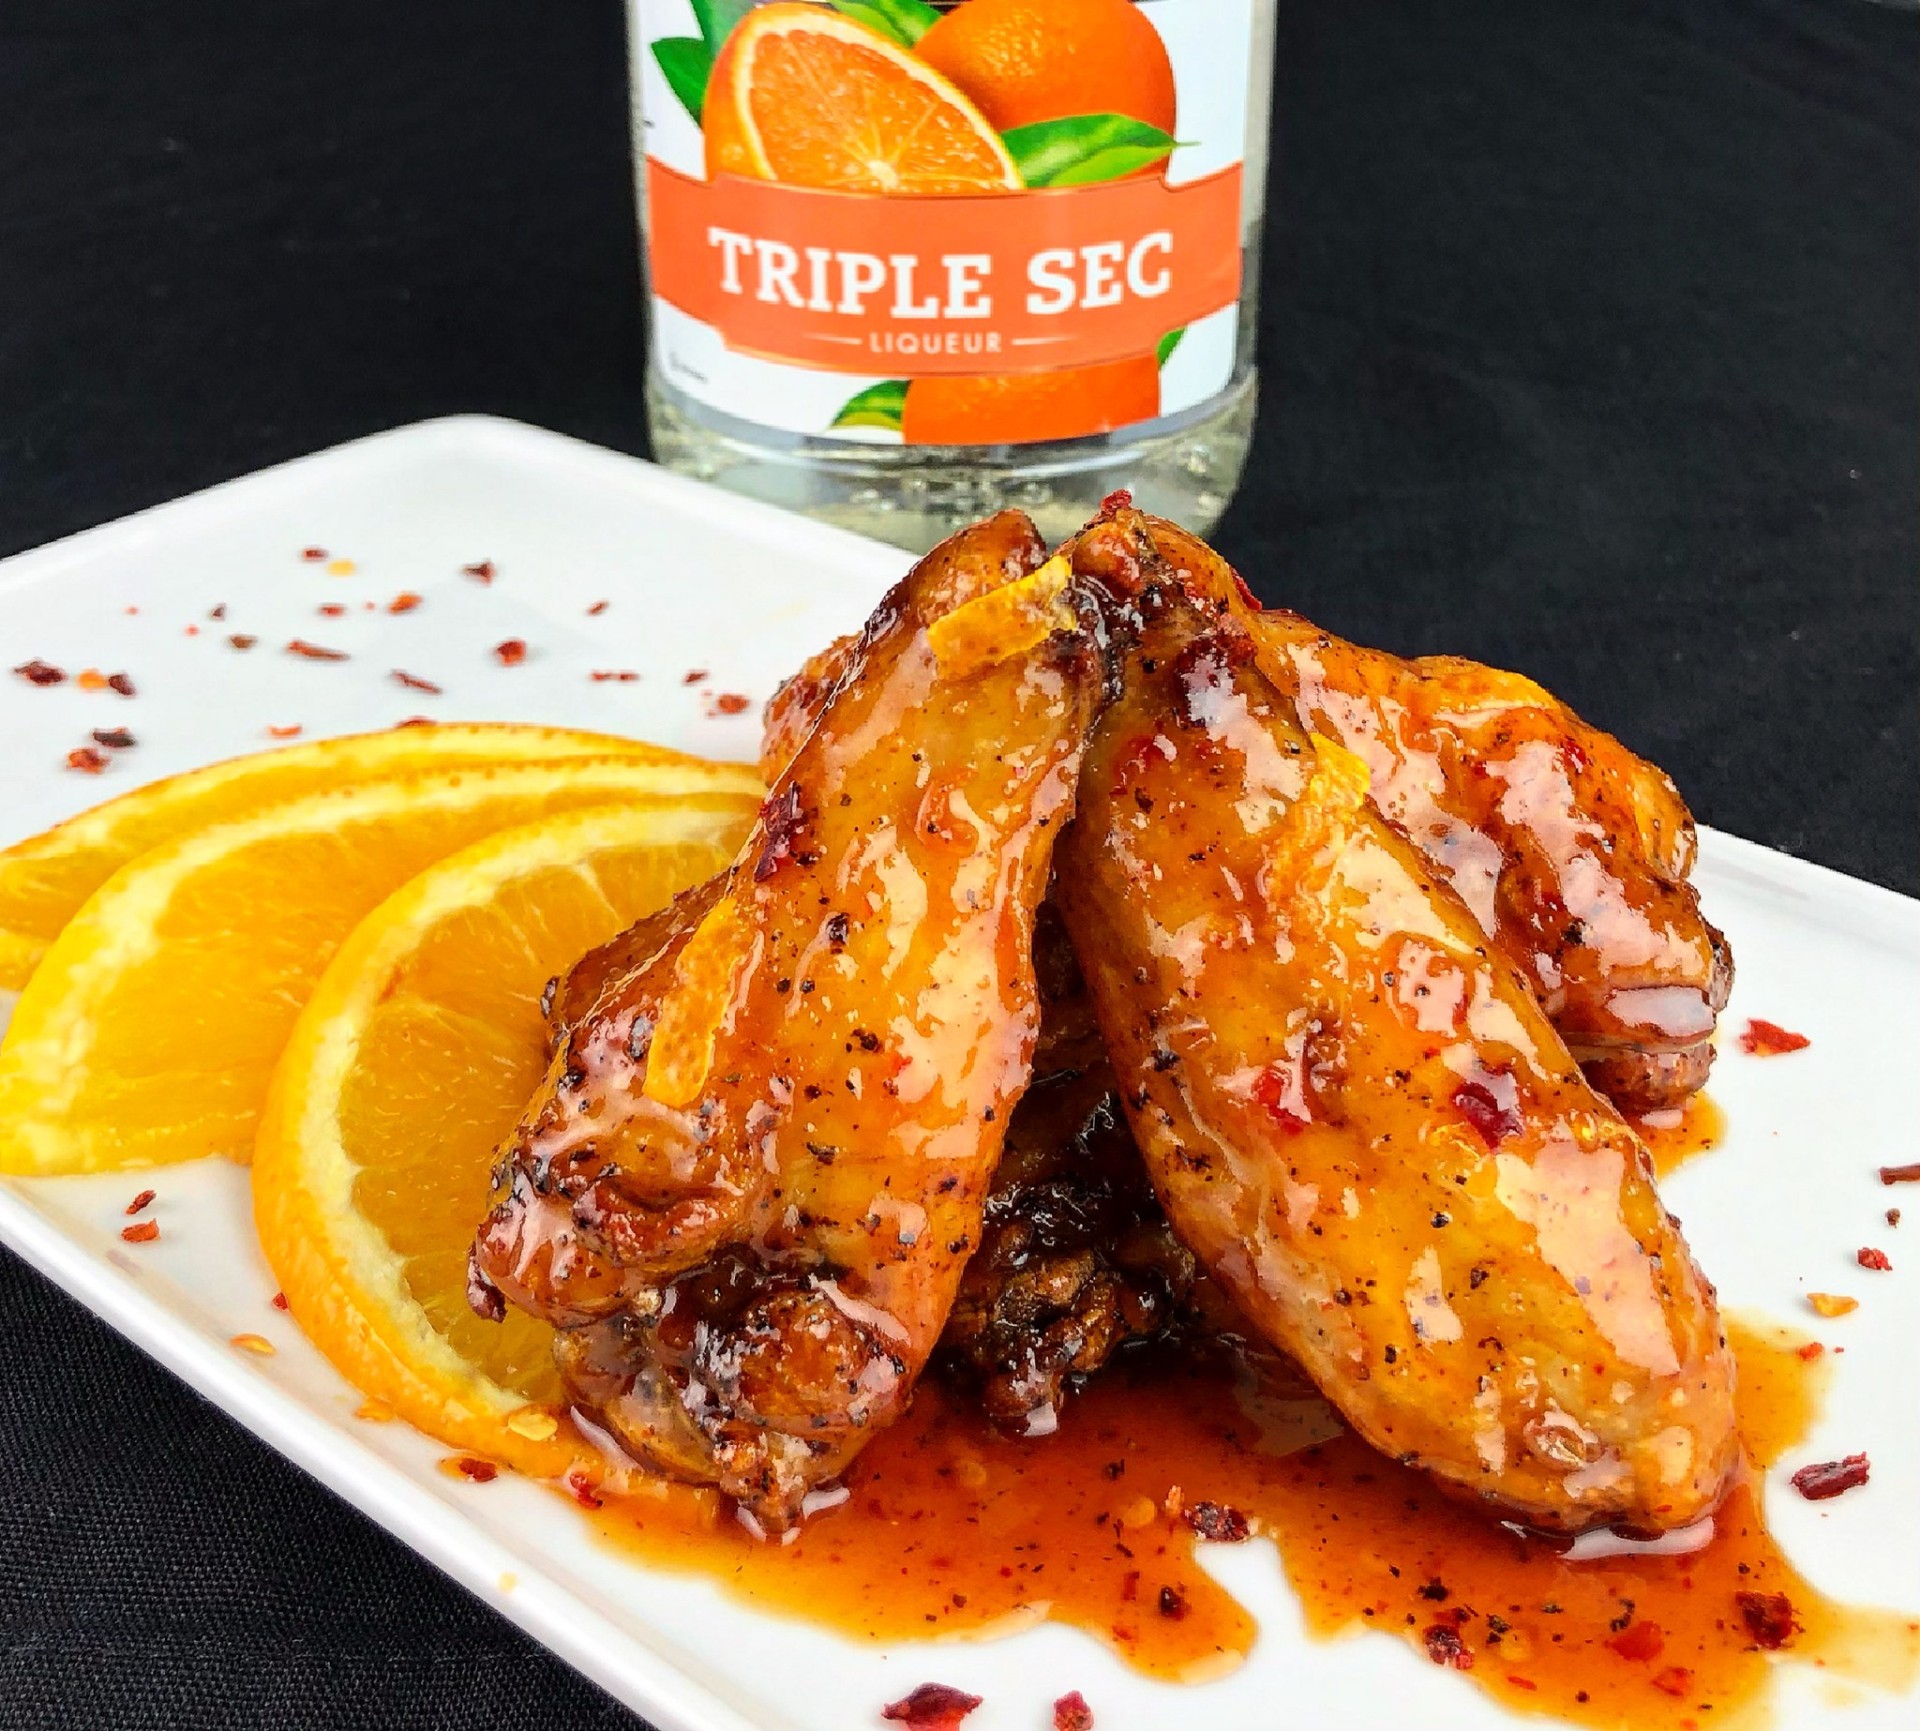 Get ready for orange soda Alcohol-infused – to hot brick mortar open kitchen ghost restaurant chicken wing 614NOW and planning wings